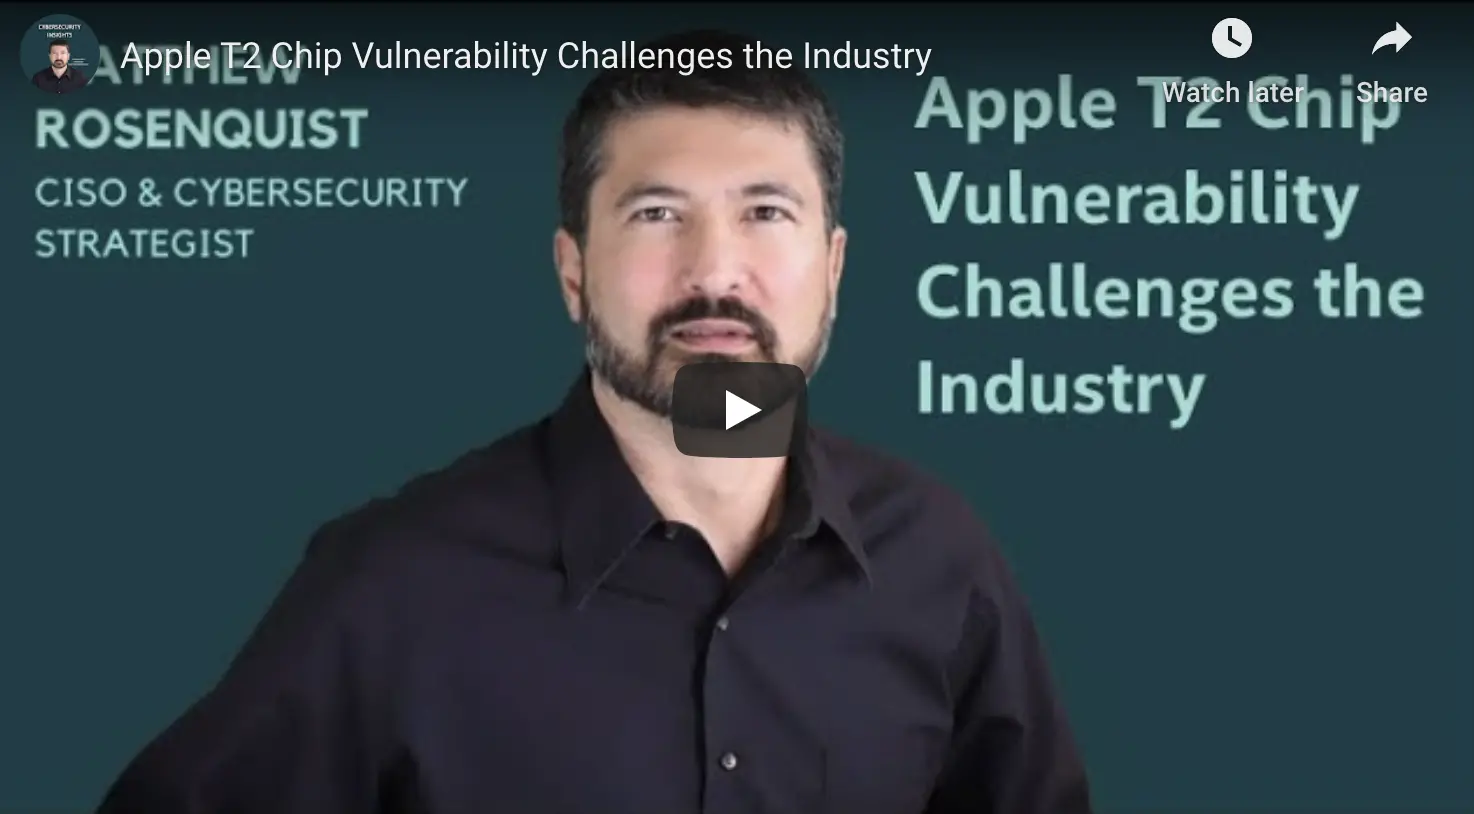 Apple_T2_Chip_Vulnerability_Challenges_the_Industry.png